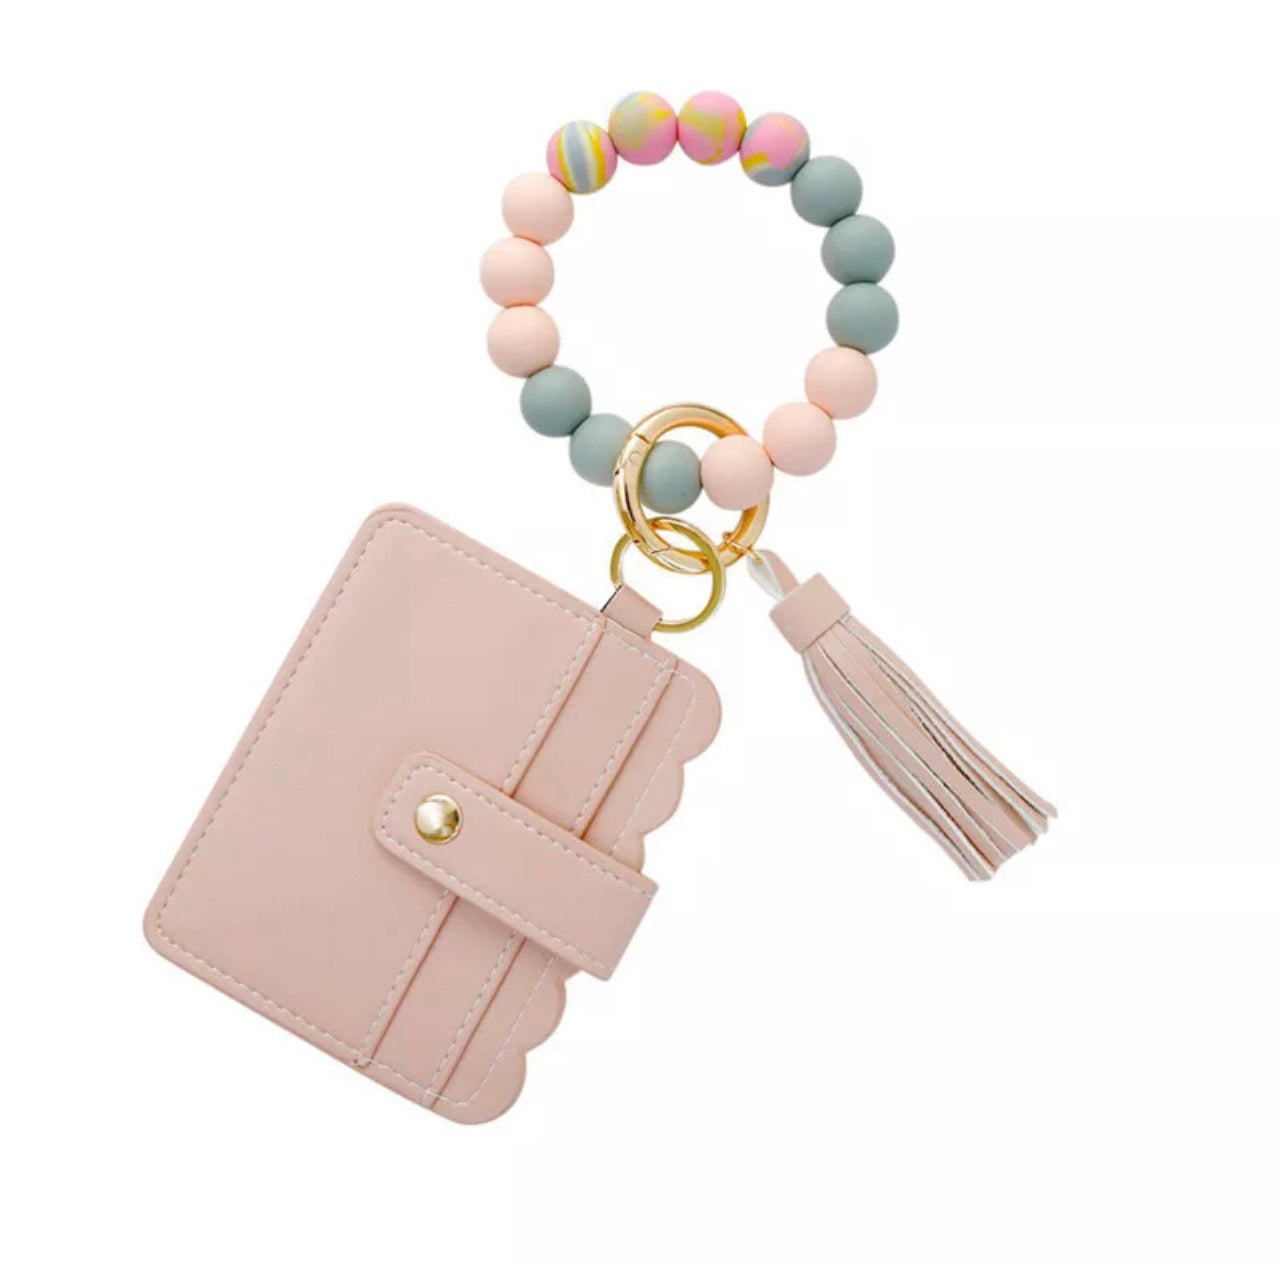 colorful silicone bracelet with pink wallet and tassel attached to it.